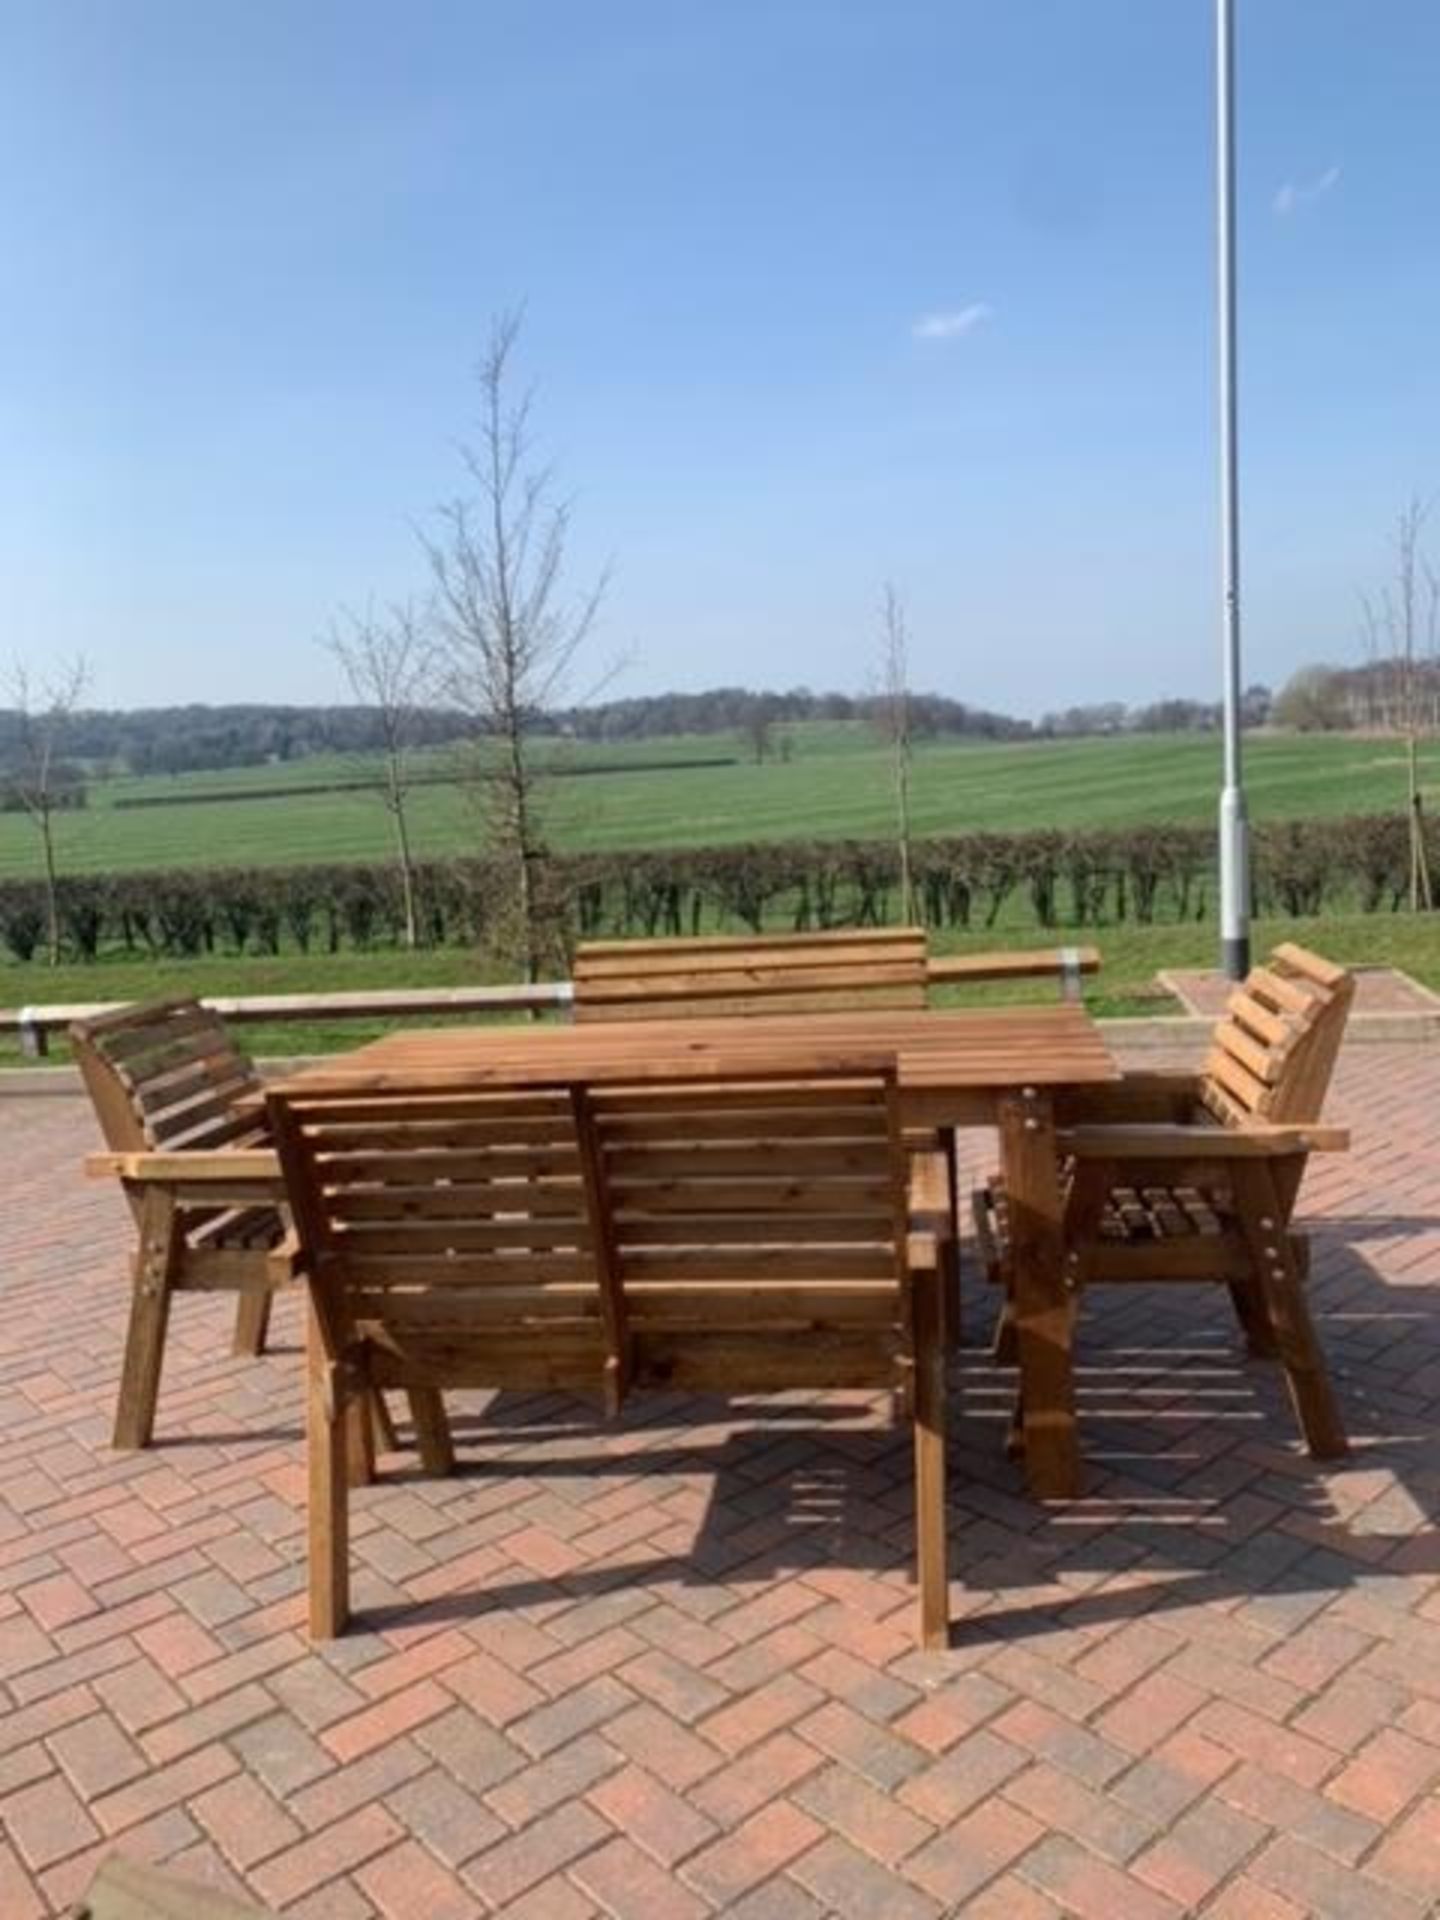 BRAND NEW QUALITY 6 seater handcrafted Garden Furniture set, Large table, 2 benches, 2 chairs - Image 5 of 6